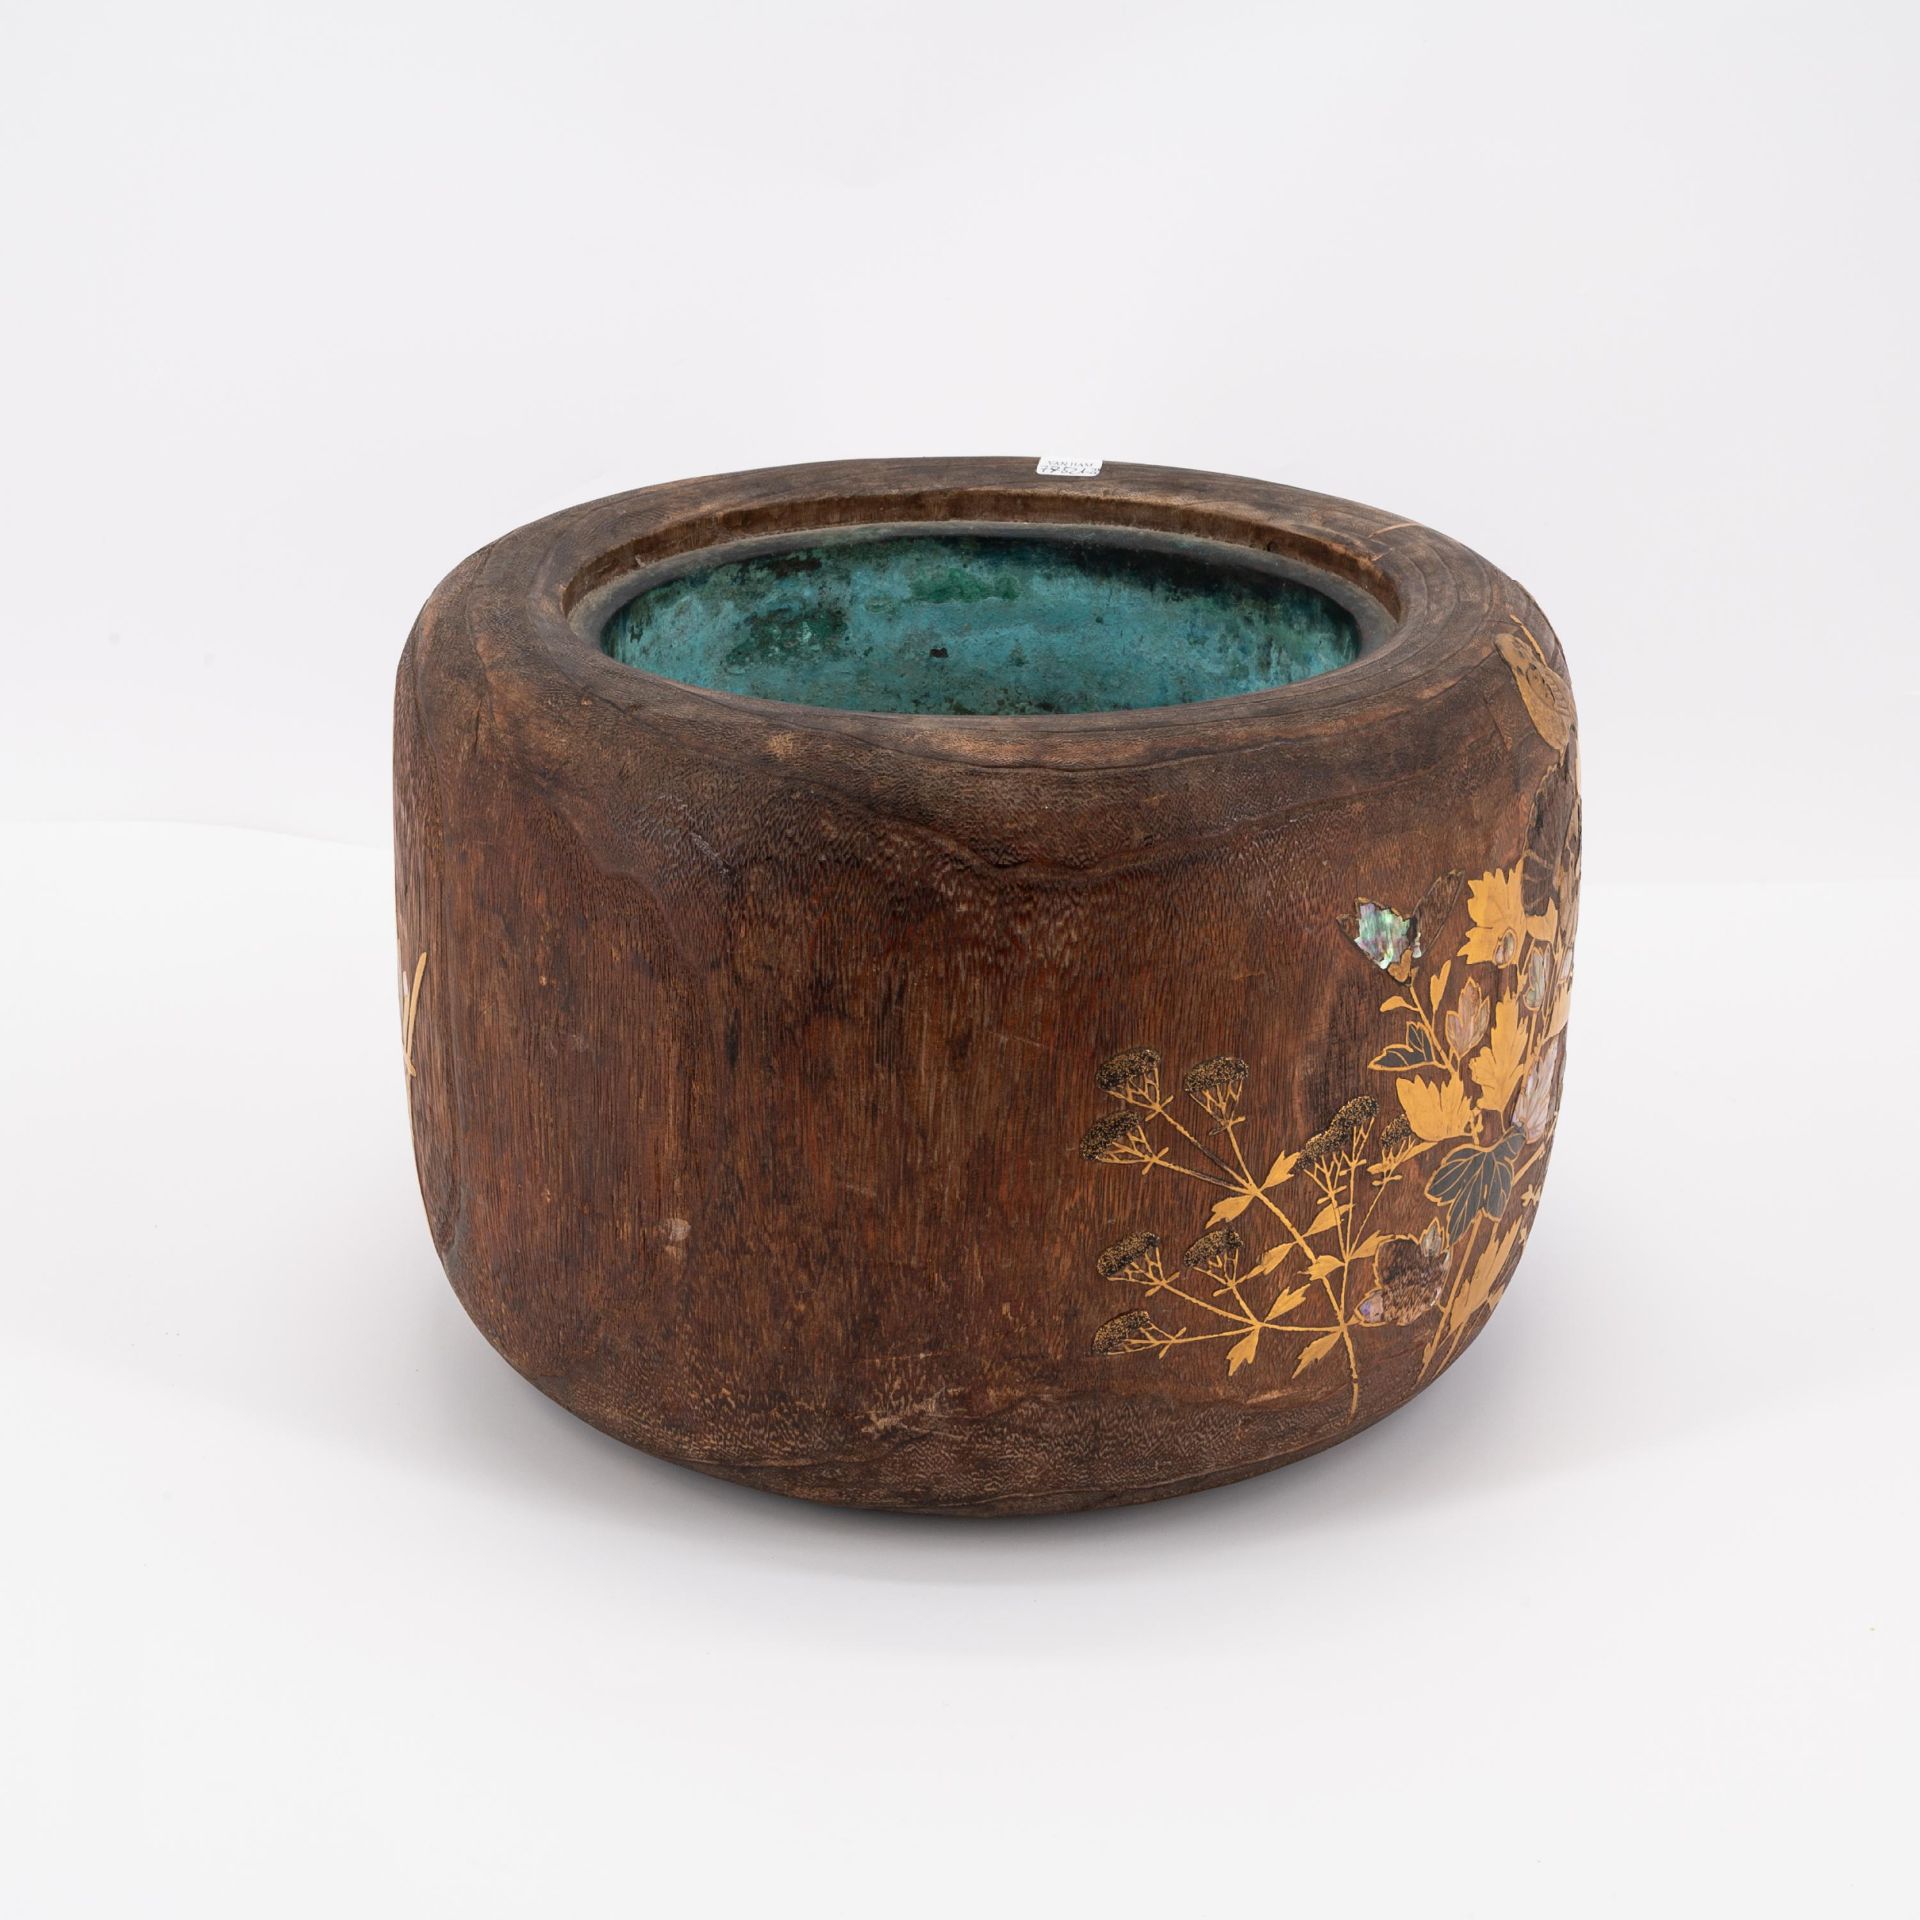 TWO WOODEN AND COPPER COAL BASINS, SO-CALLED HIBACHI WITH FLORAL DECOR - Image 3 of 11